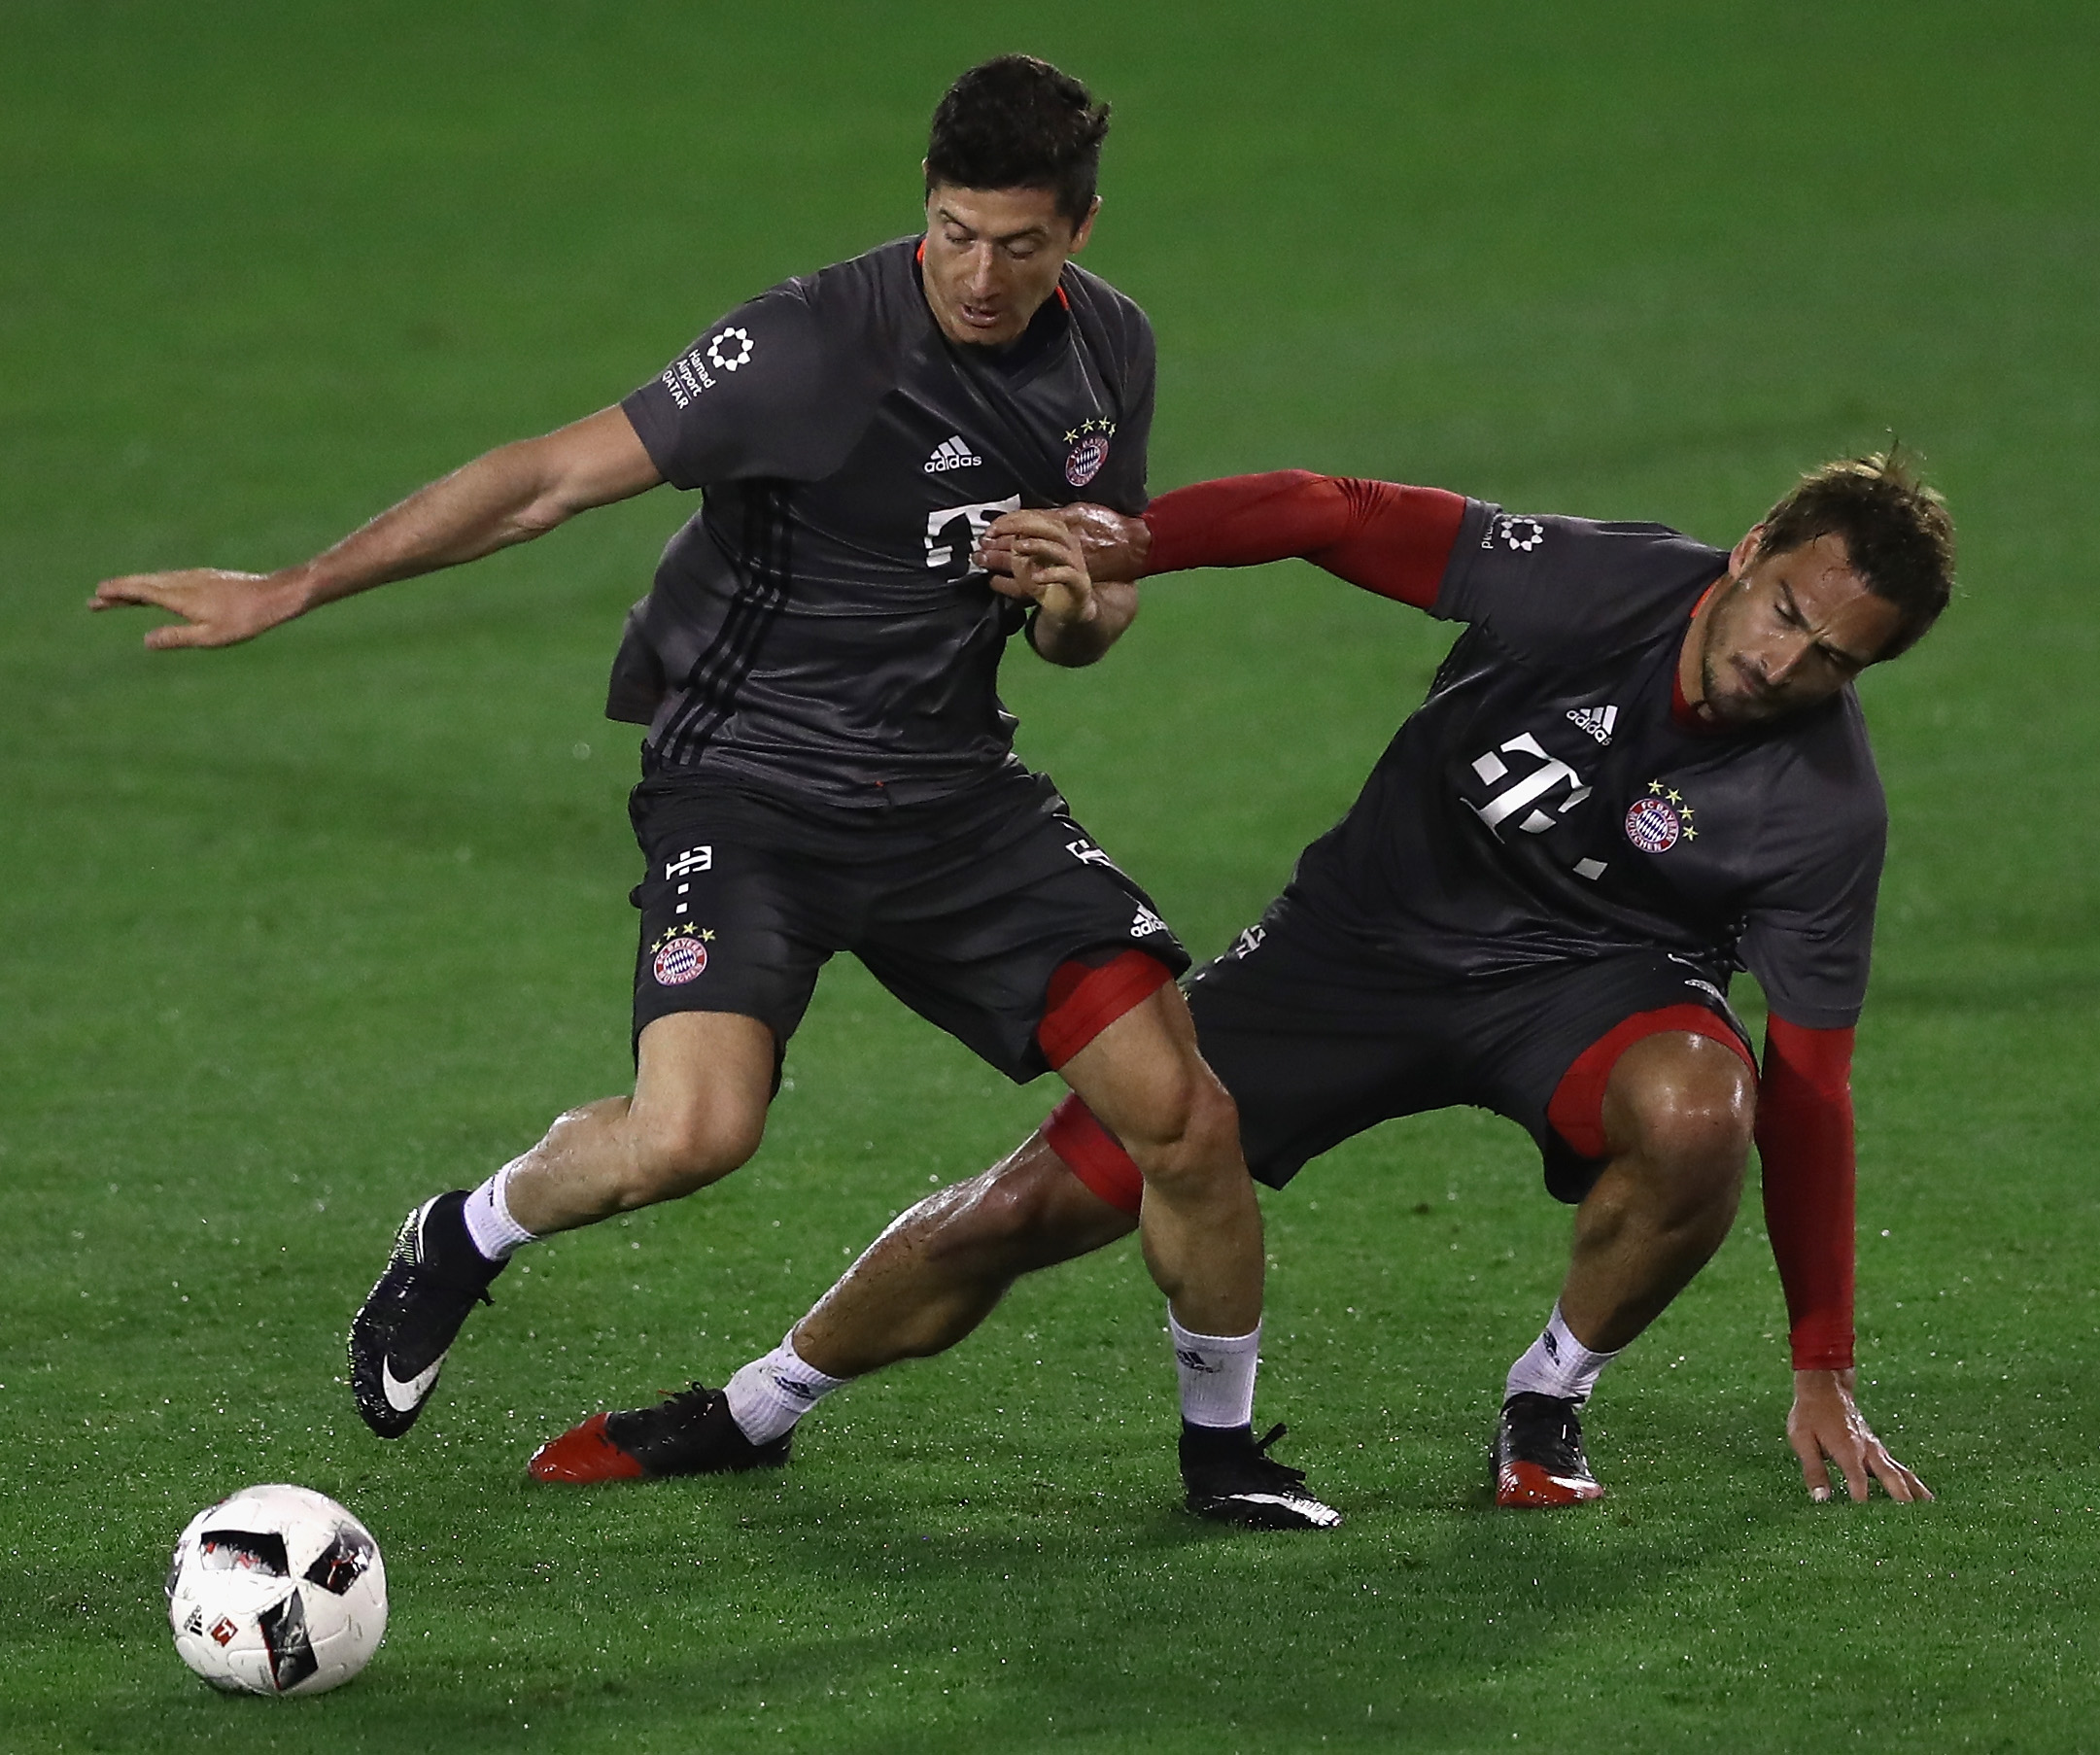 Robert Lewandowski is challenged by Mats Hummels during a training session at day 5 of the Bayern Muenchen training camp at Aspire Academy on January 7, 2017 in Doha, Qatar.